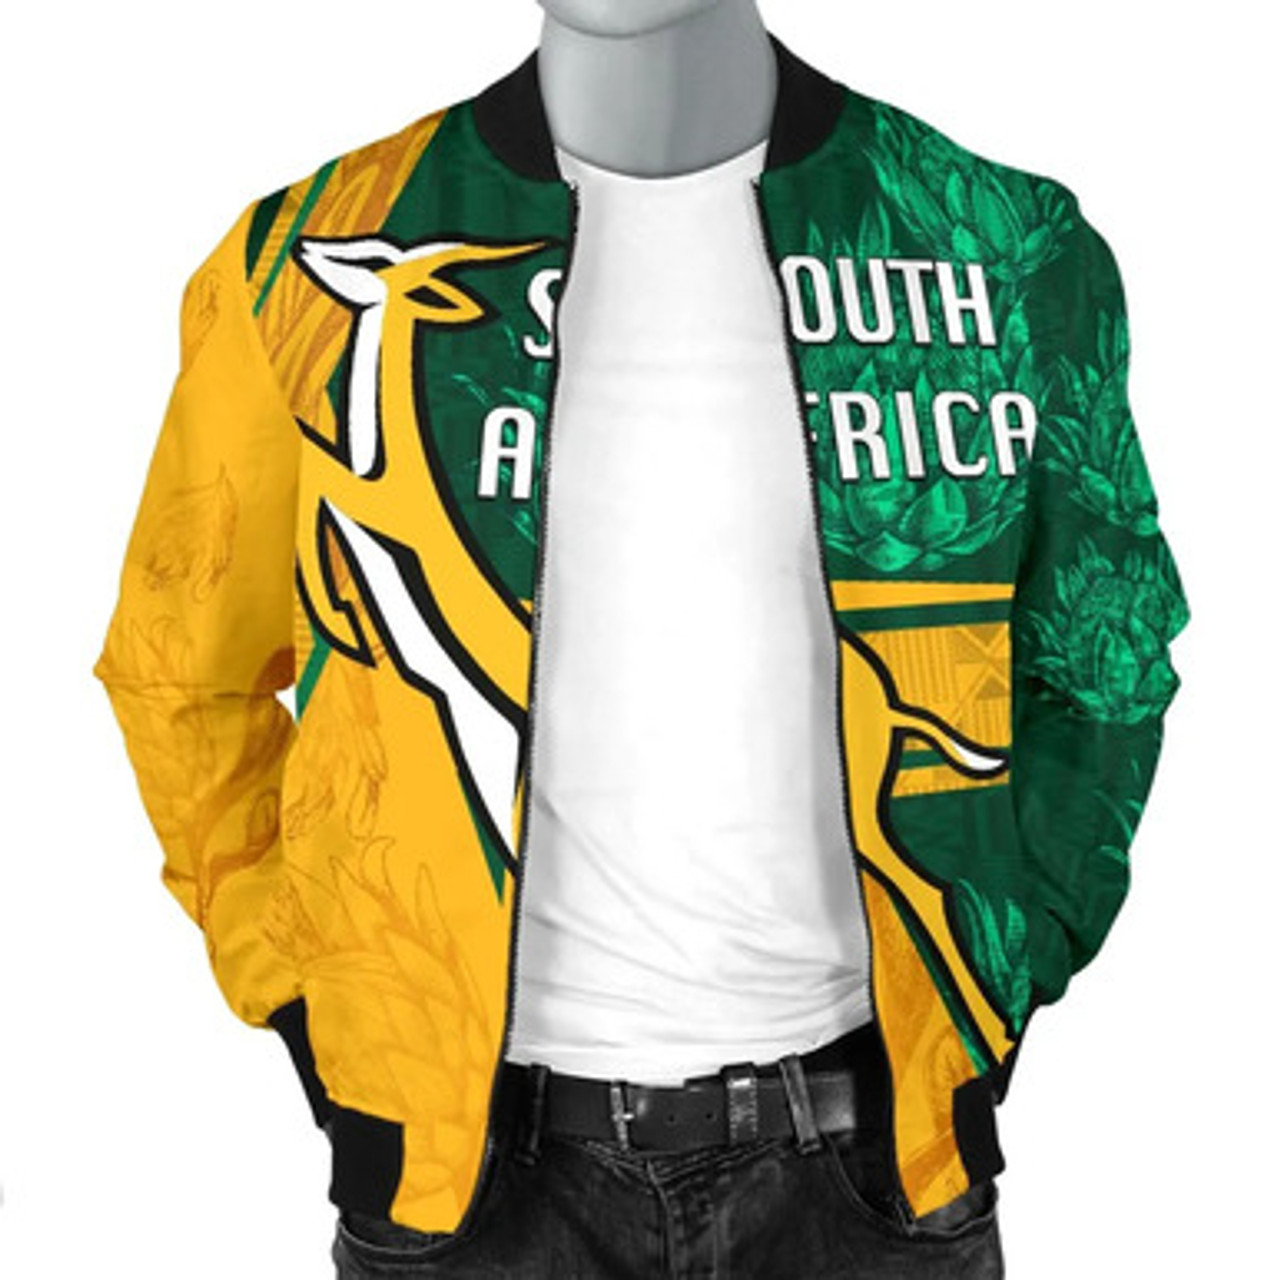 South Africa Bomber Jacket - African Patterns Springboks Rugby Be Fancy Bomber Jacket